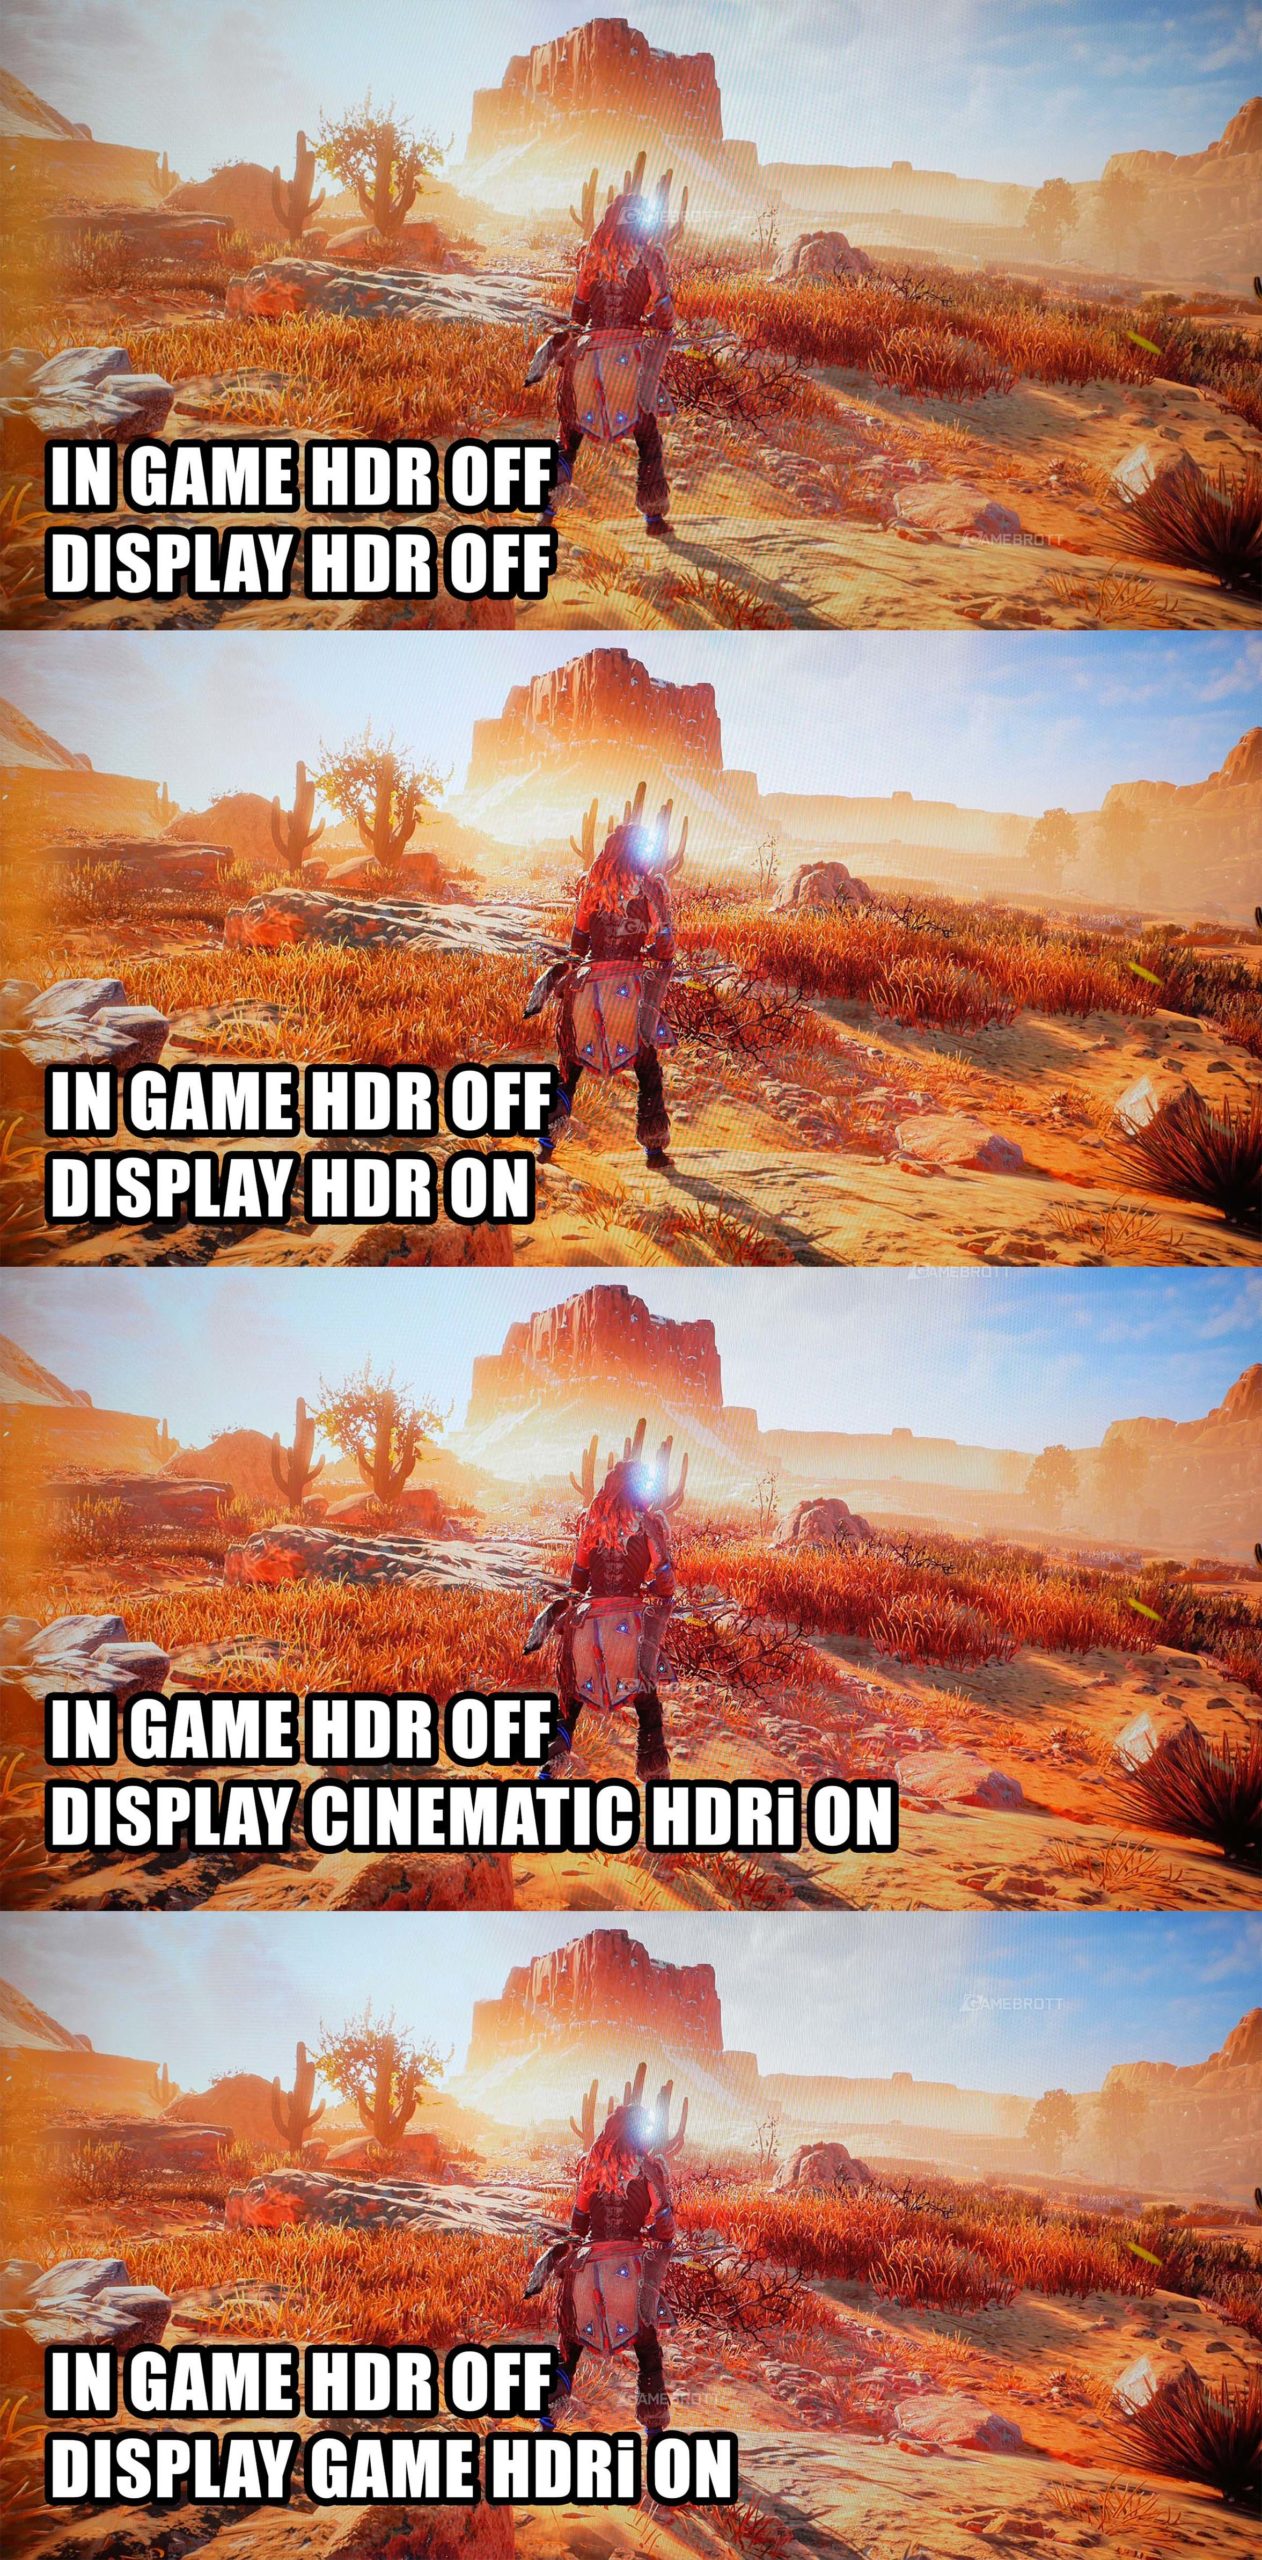 Horizon HDR OFF Display HDR ON COMPARISON scaled